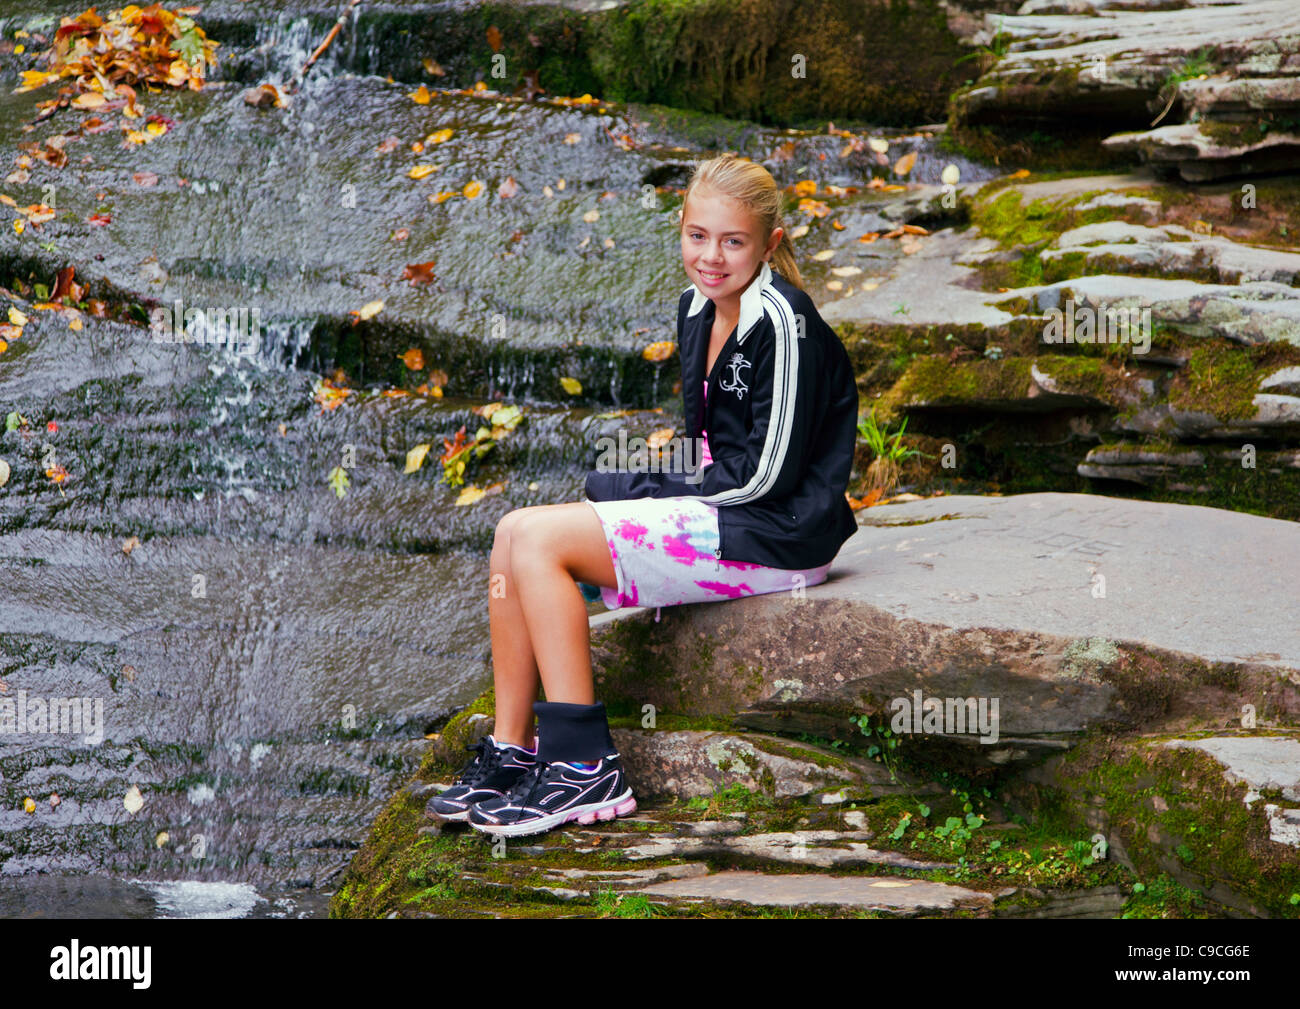 A young girl sitting on a rock near a waterfall Stock Photo